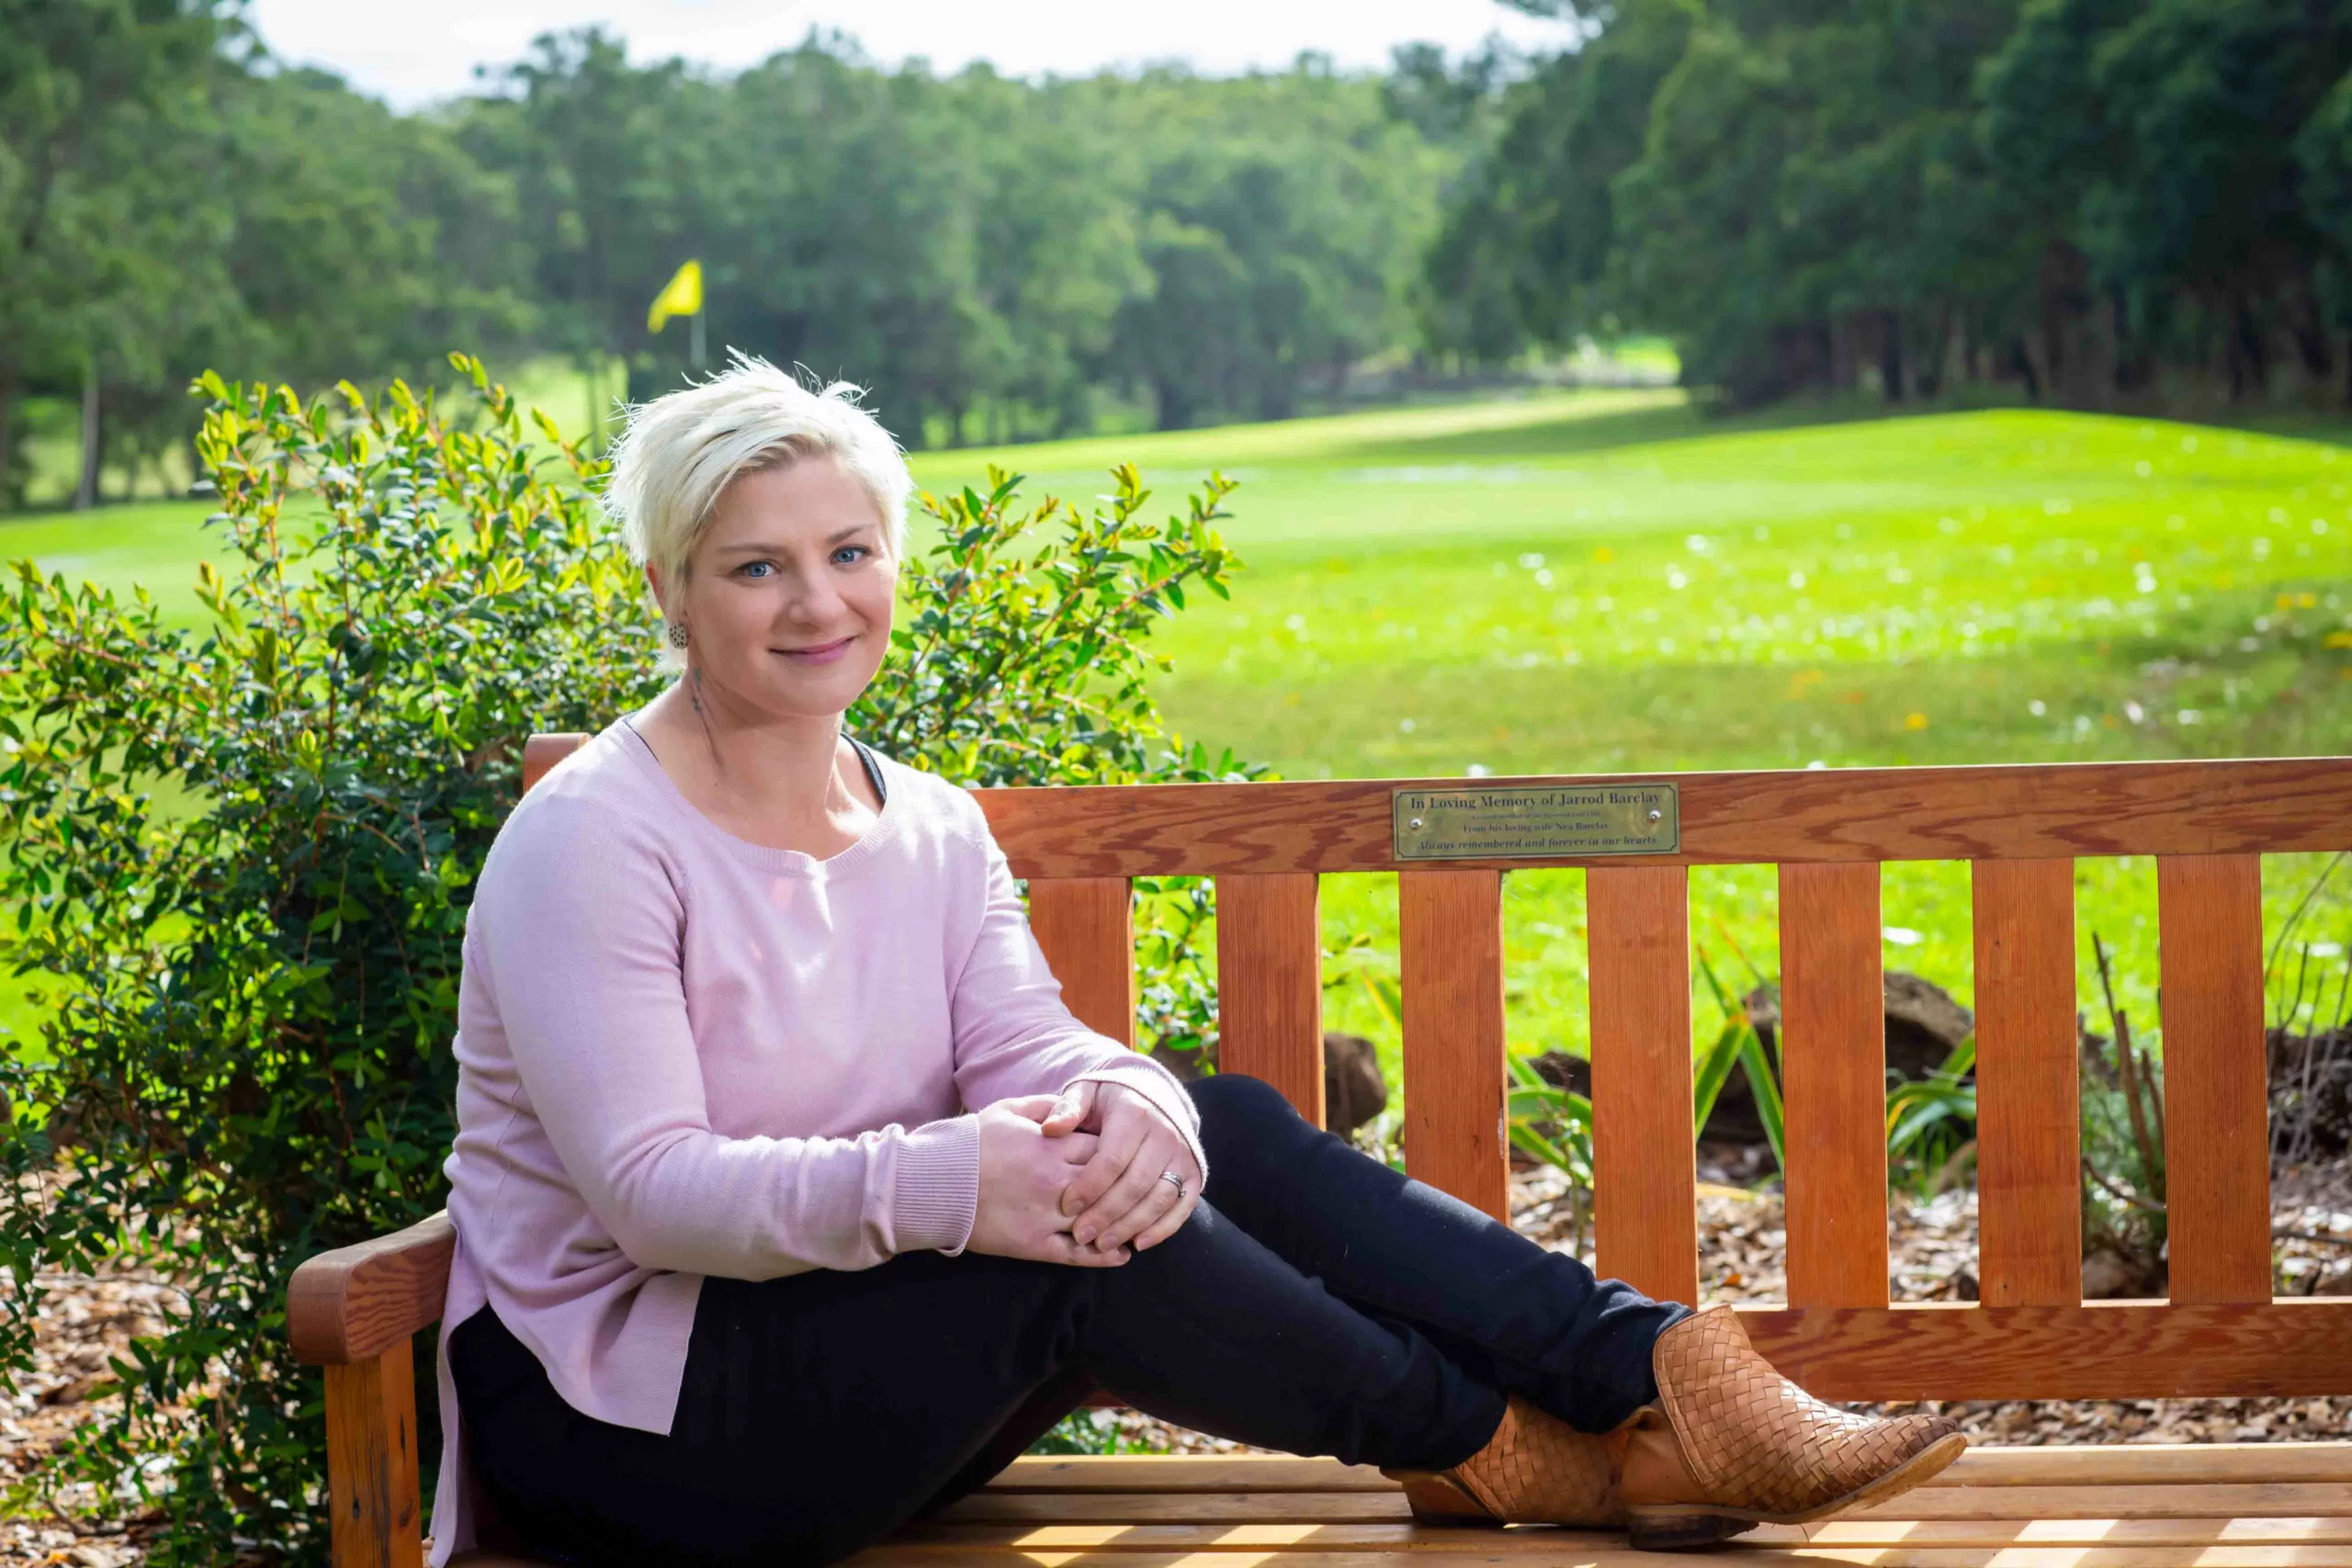 Nea Barclay is seated on the wooden seat in memory of her husband at the Heywood Golf Club in Victoria. Nea wears a lilac jumper, dark pants and tan boots. A garden bed and golf green with a yellow flag are behind her.